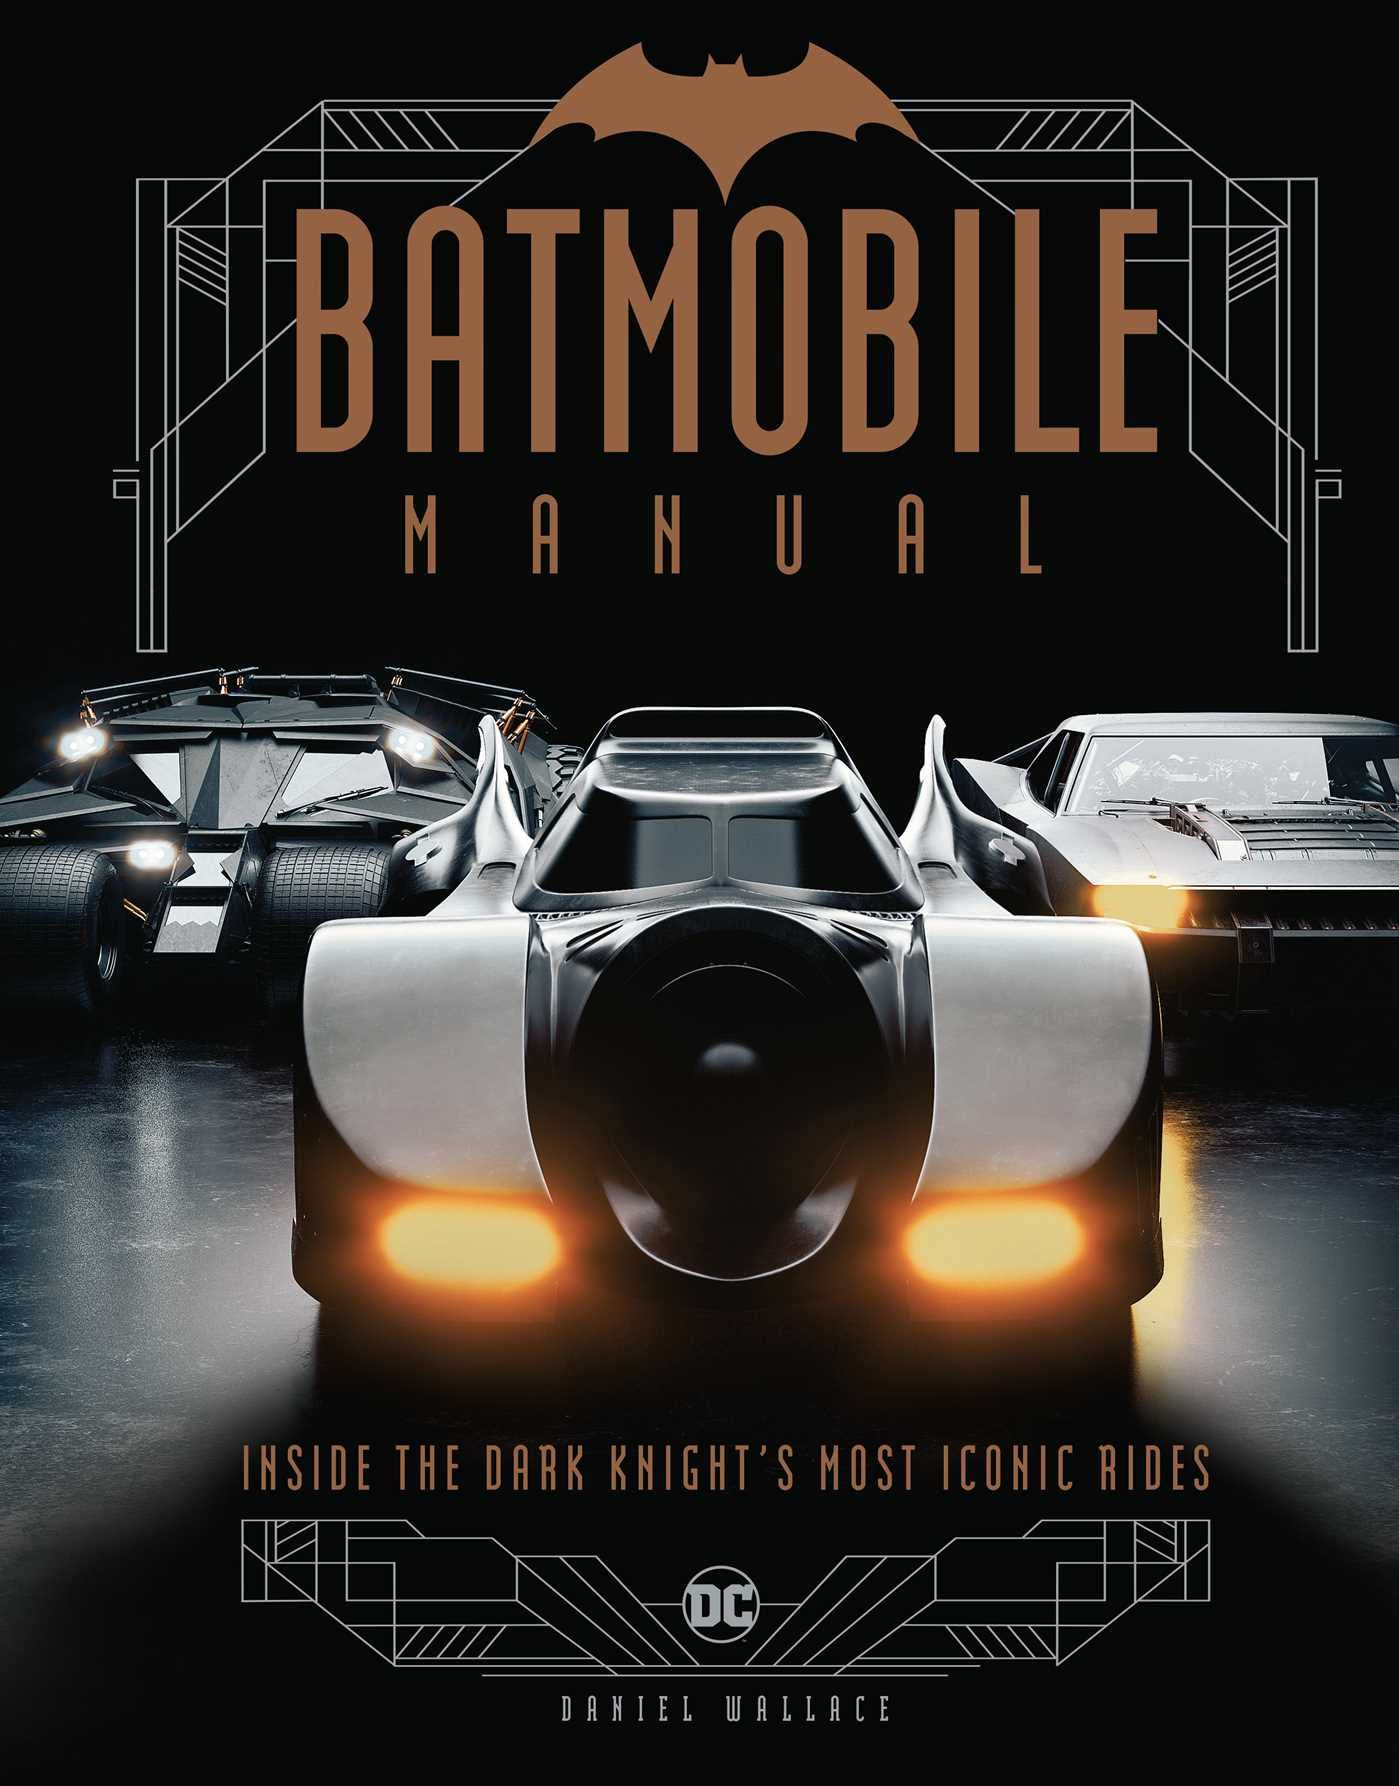 Batmobile Manual: Inside the Dark Knights Most Iconic Rides (Hardcover)